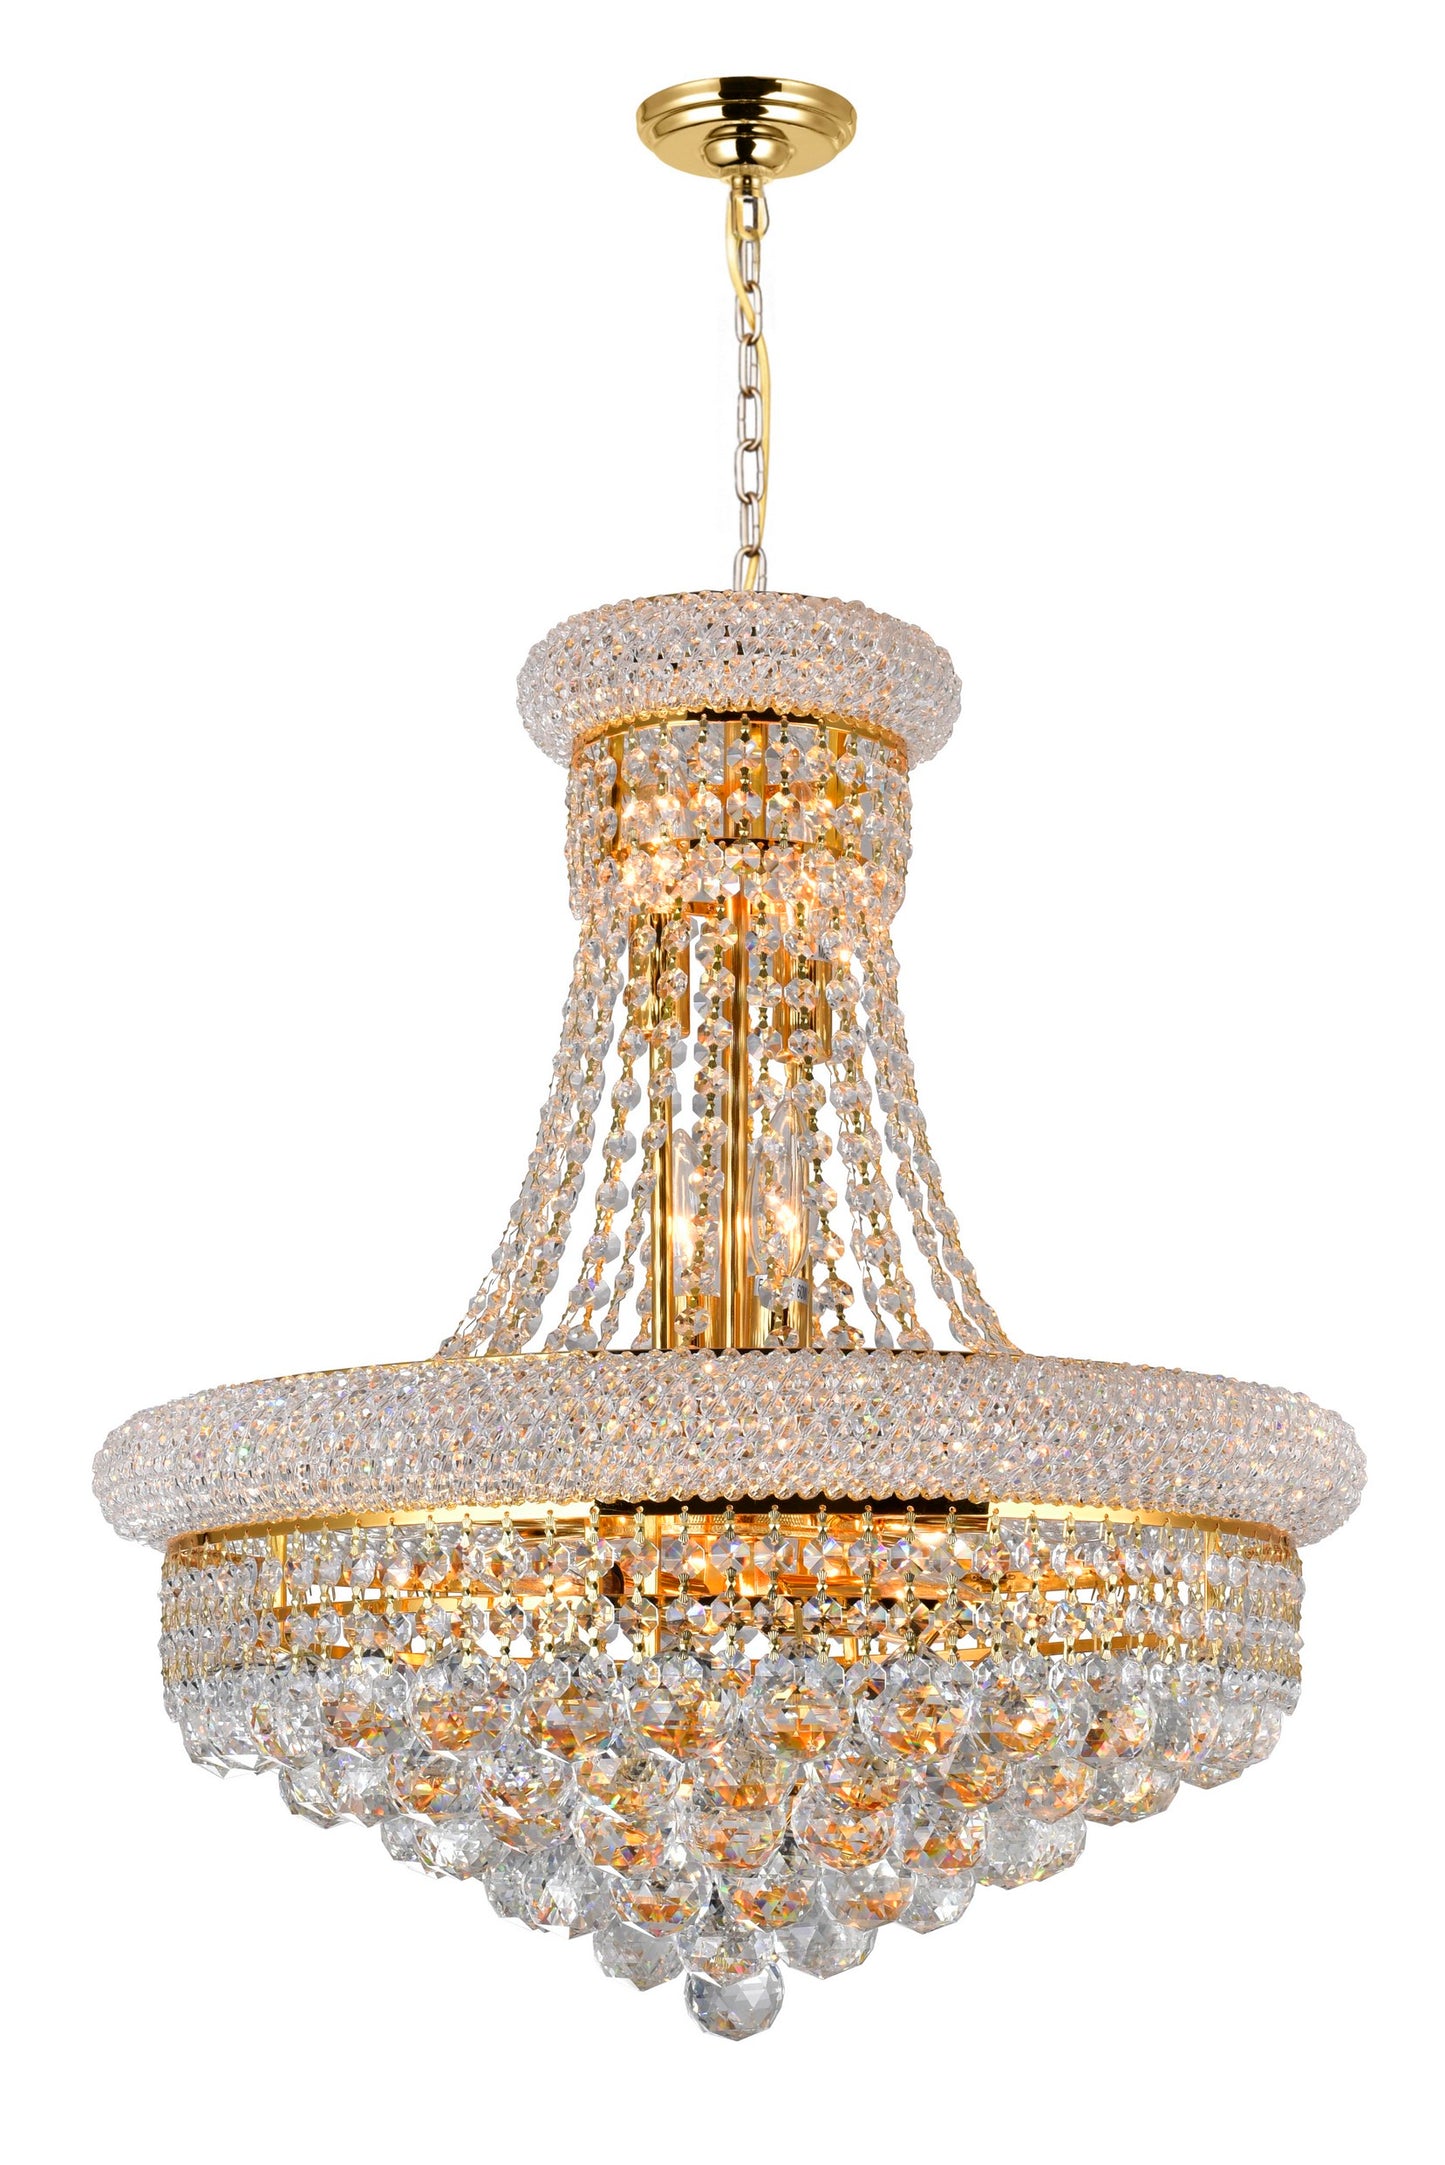 14 LIGHT DOWN CHANDELIER WITH GOLD FINISH - Dreamart Gallery